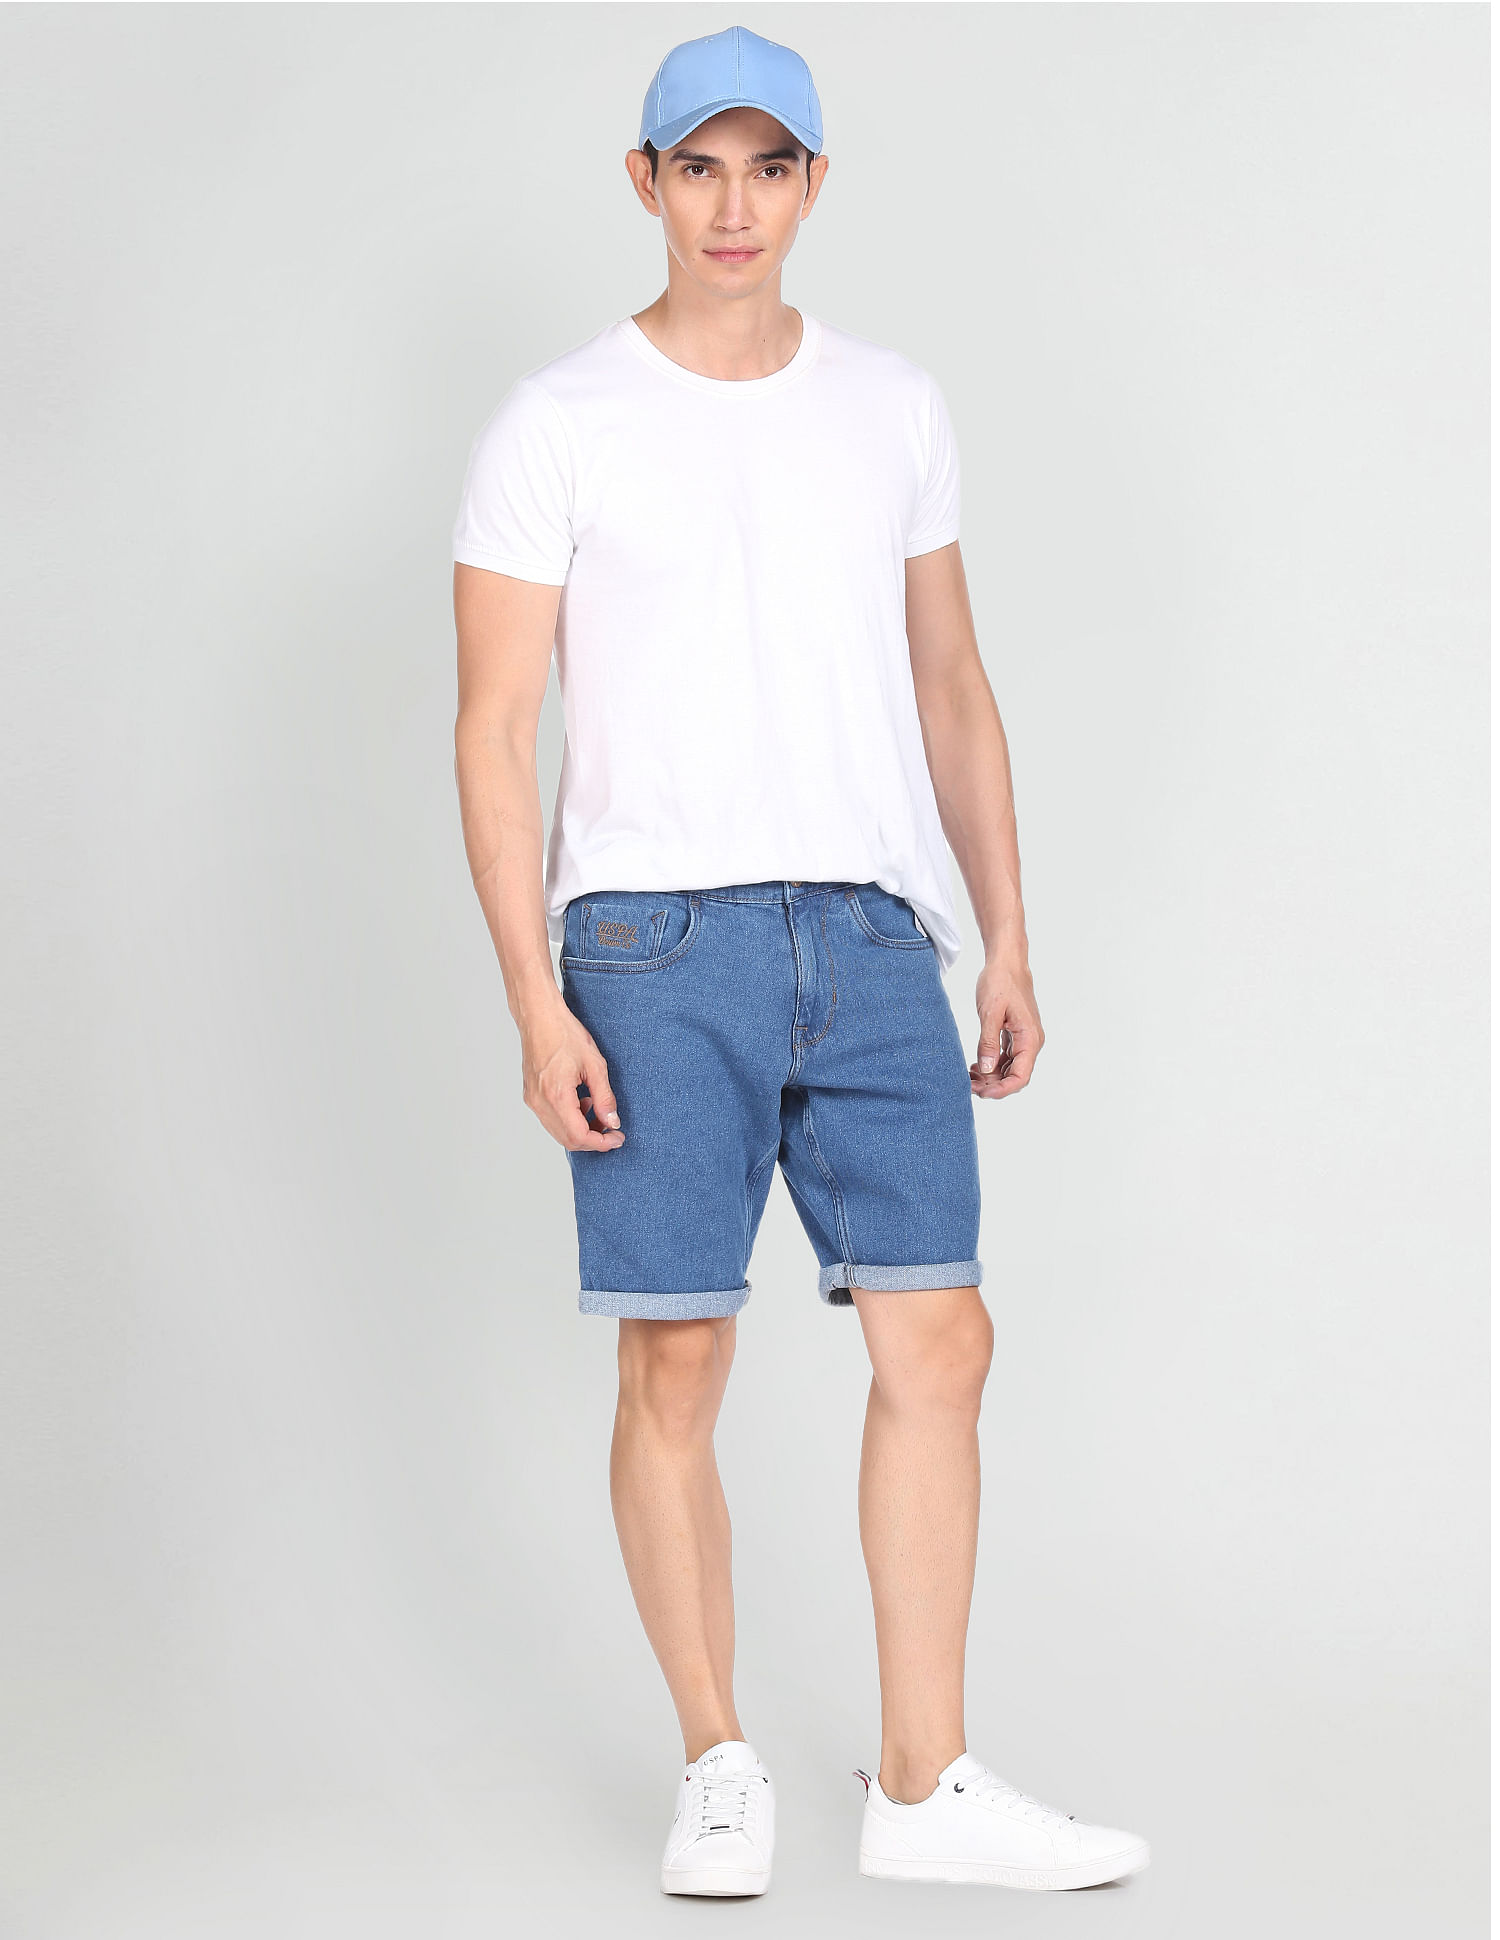 Buy Blue Shorts for Men by Campus Sutra Online  Ajiocom